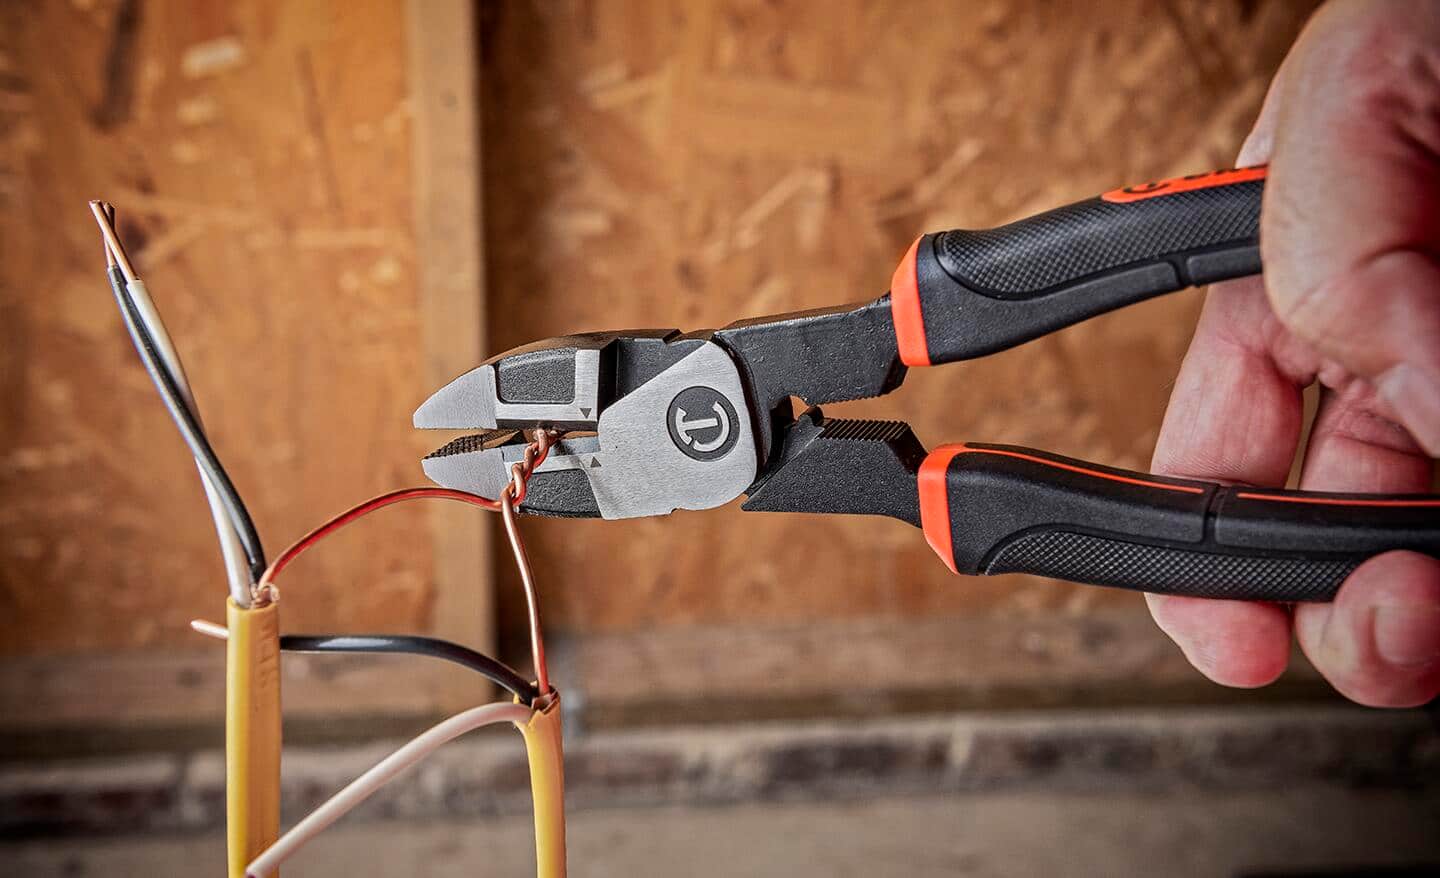 A person uses a pair of pliers while wiring an outlet.